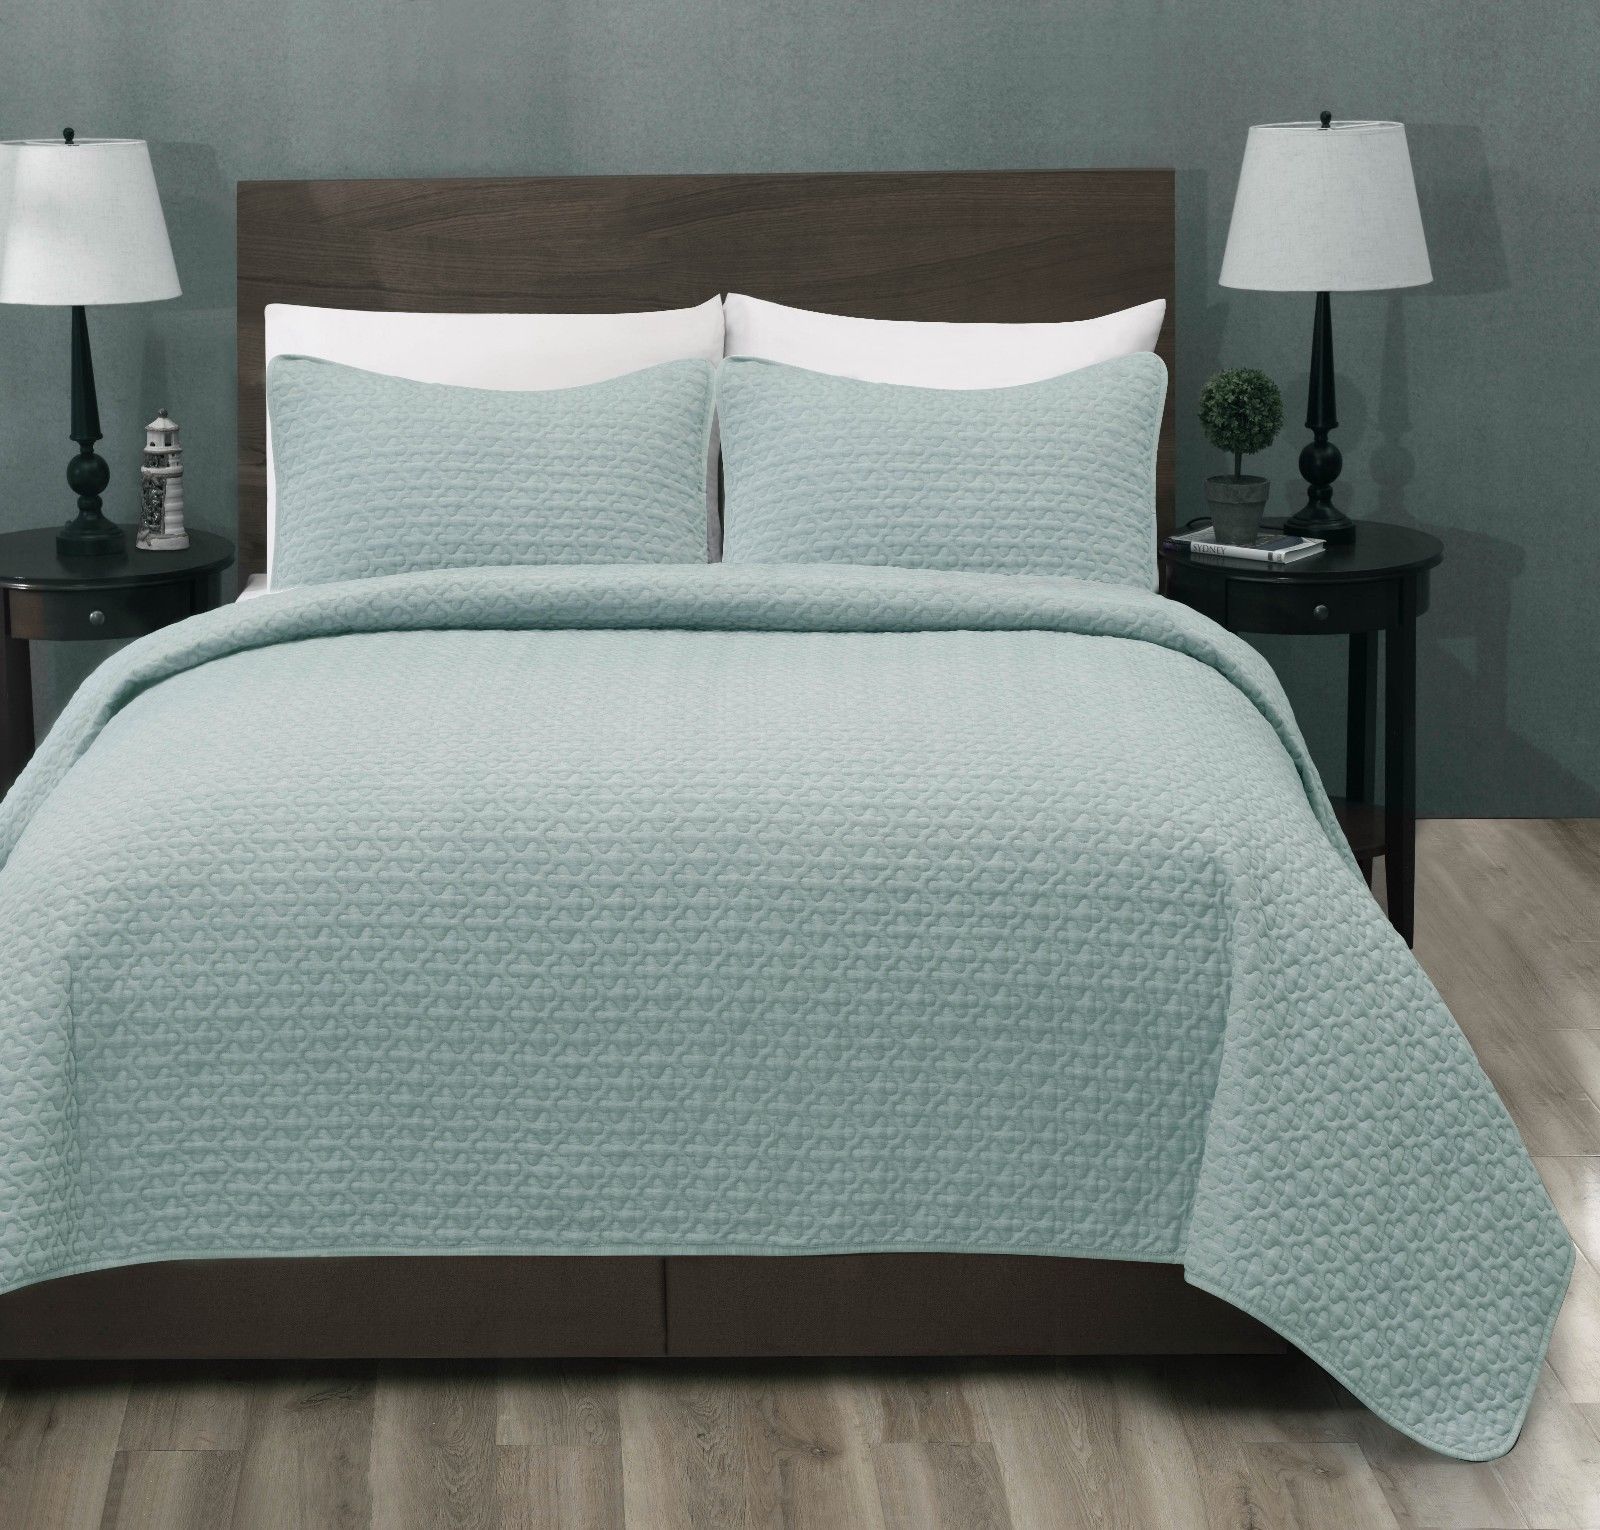 Madison Quilted Bedspread Set, Aqua Green Coverlet Light Weight Bed ...